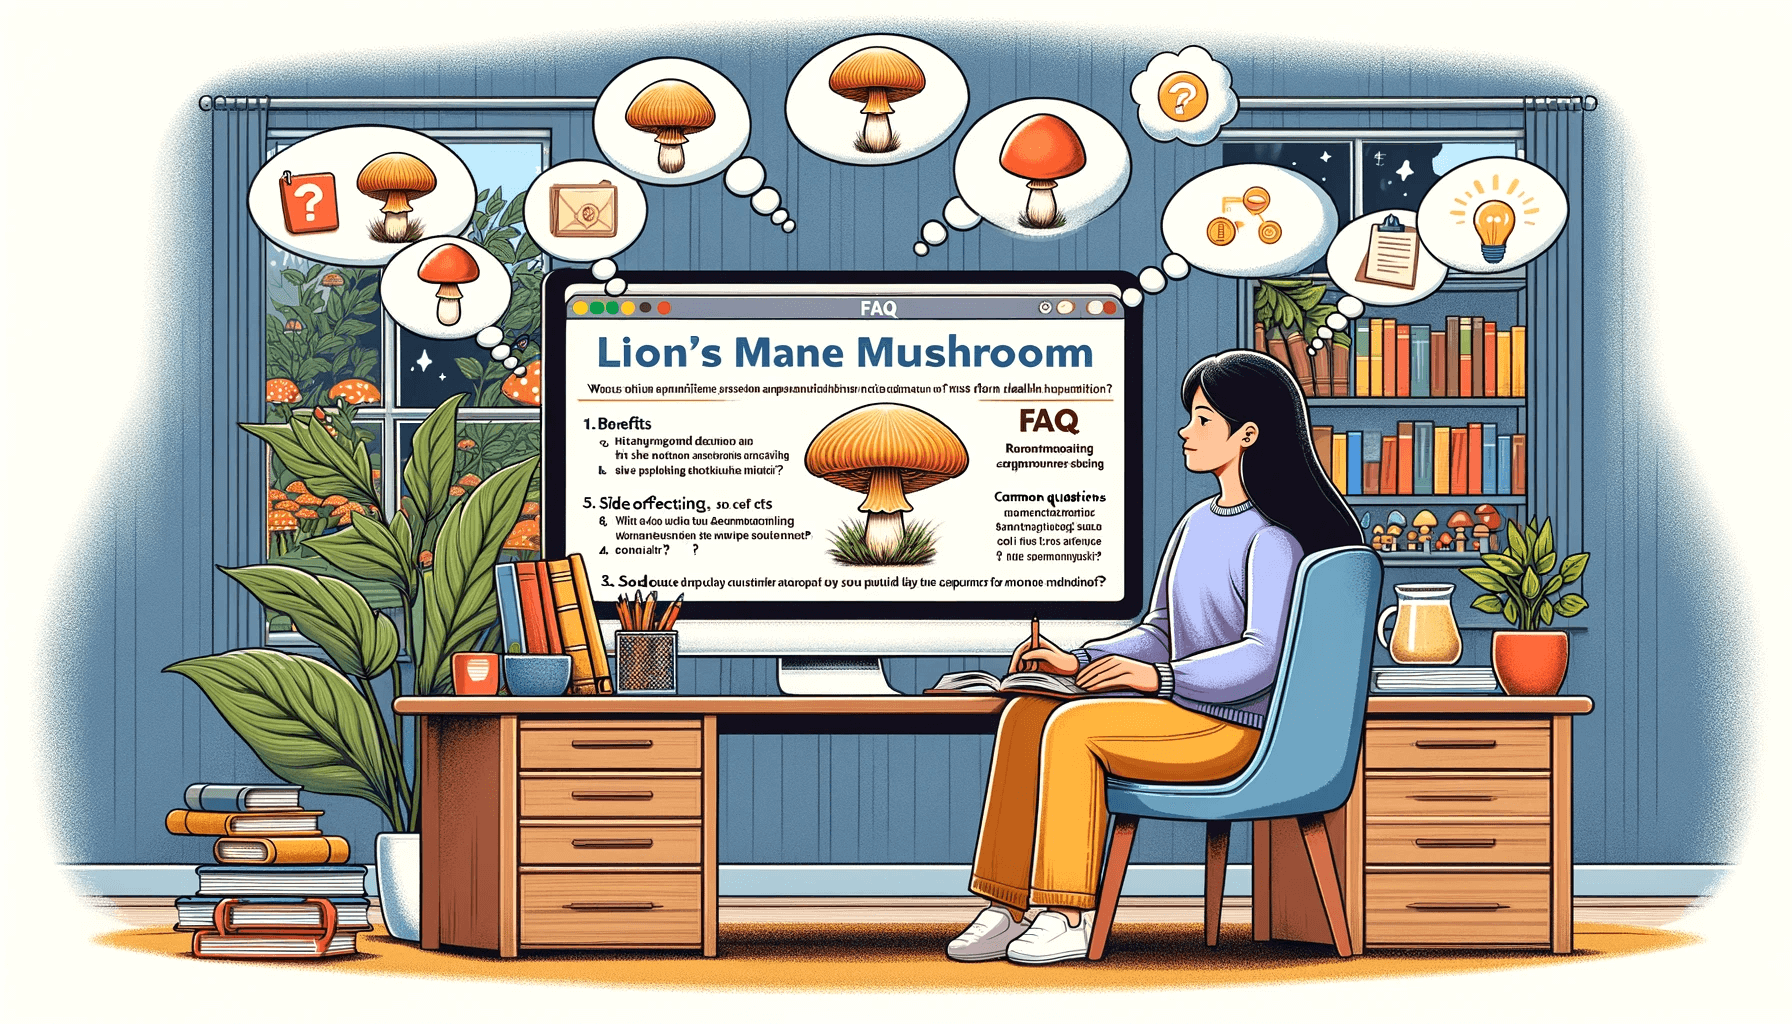 Inquisitive image representing frequently asked questions about Lion's Mane mushroom, providing clarity and further information